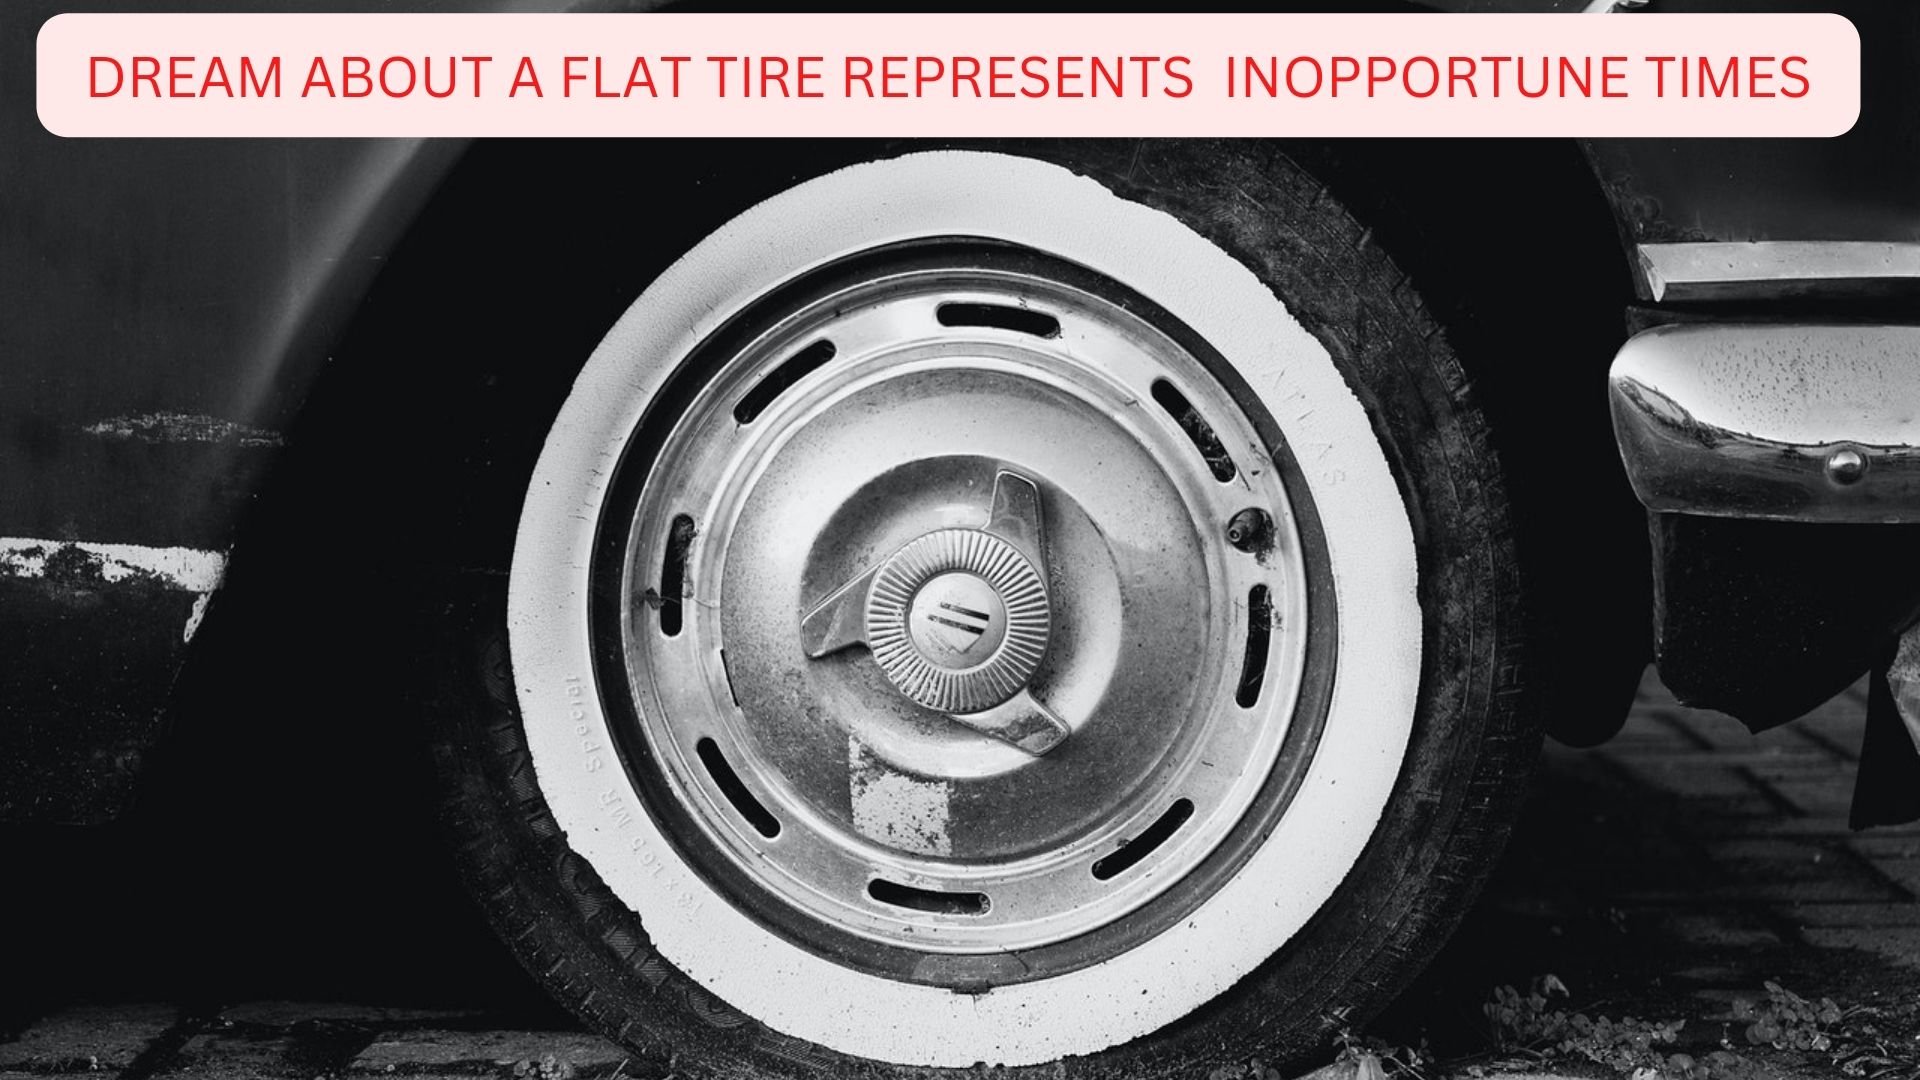 Dream About A Flat Tire Represents Inopportune Times